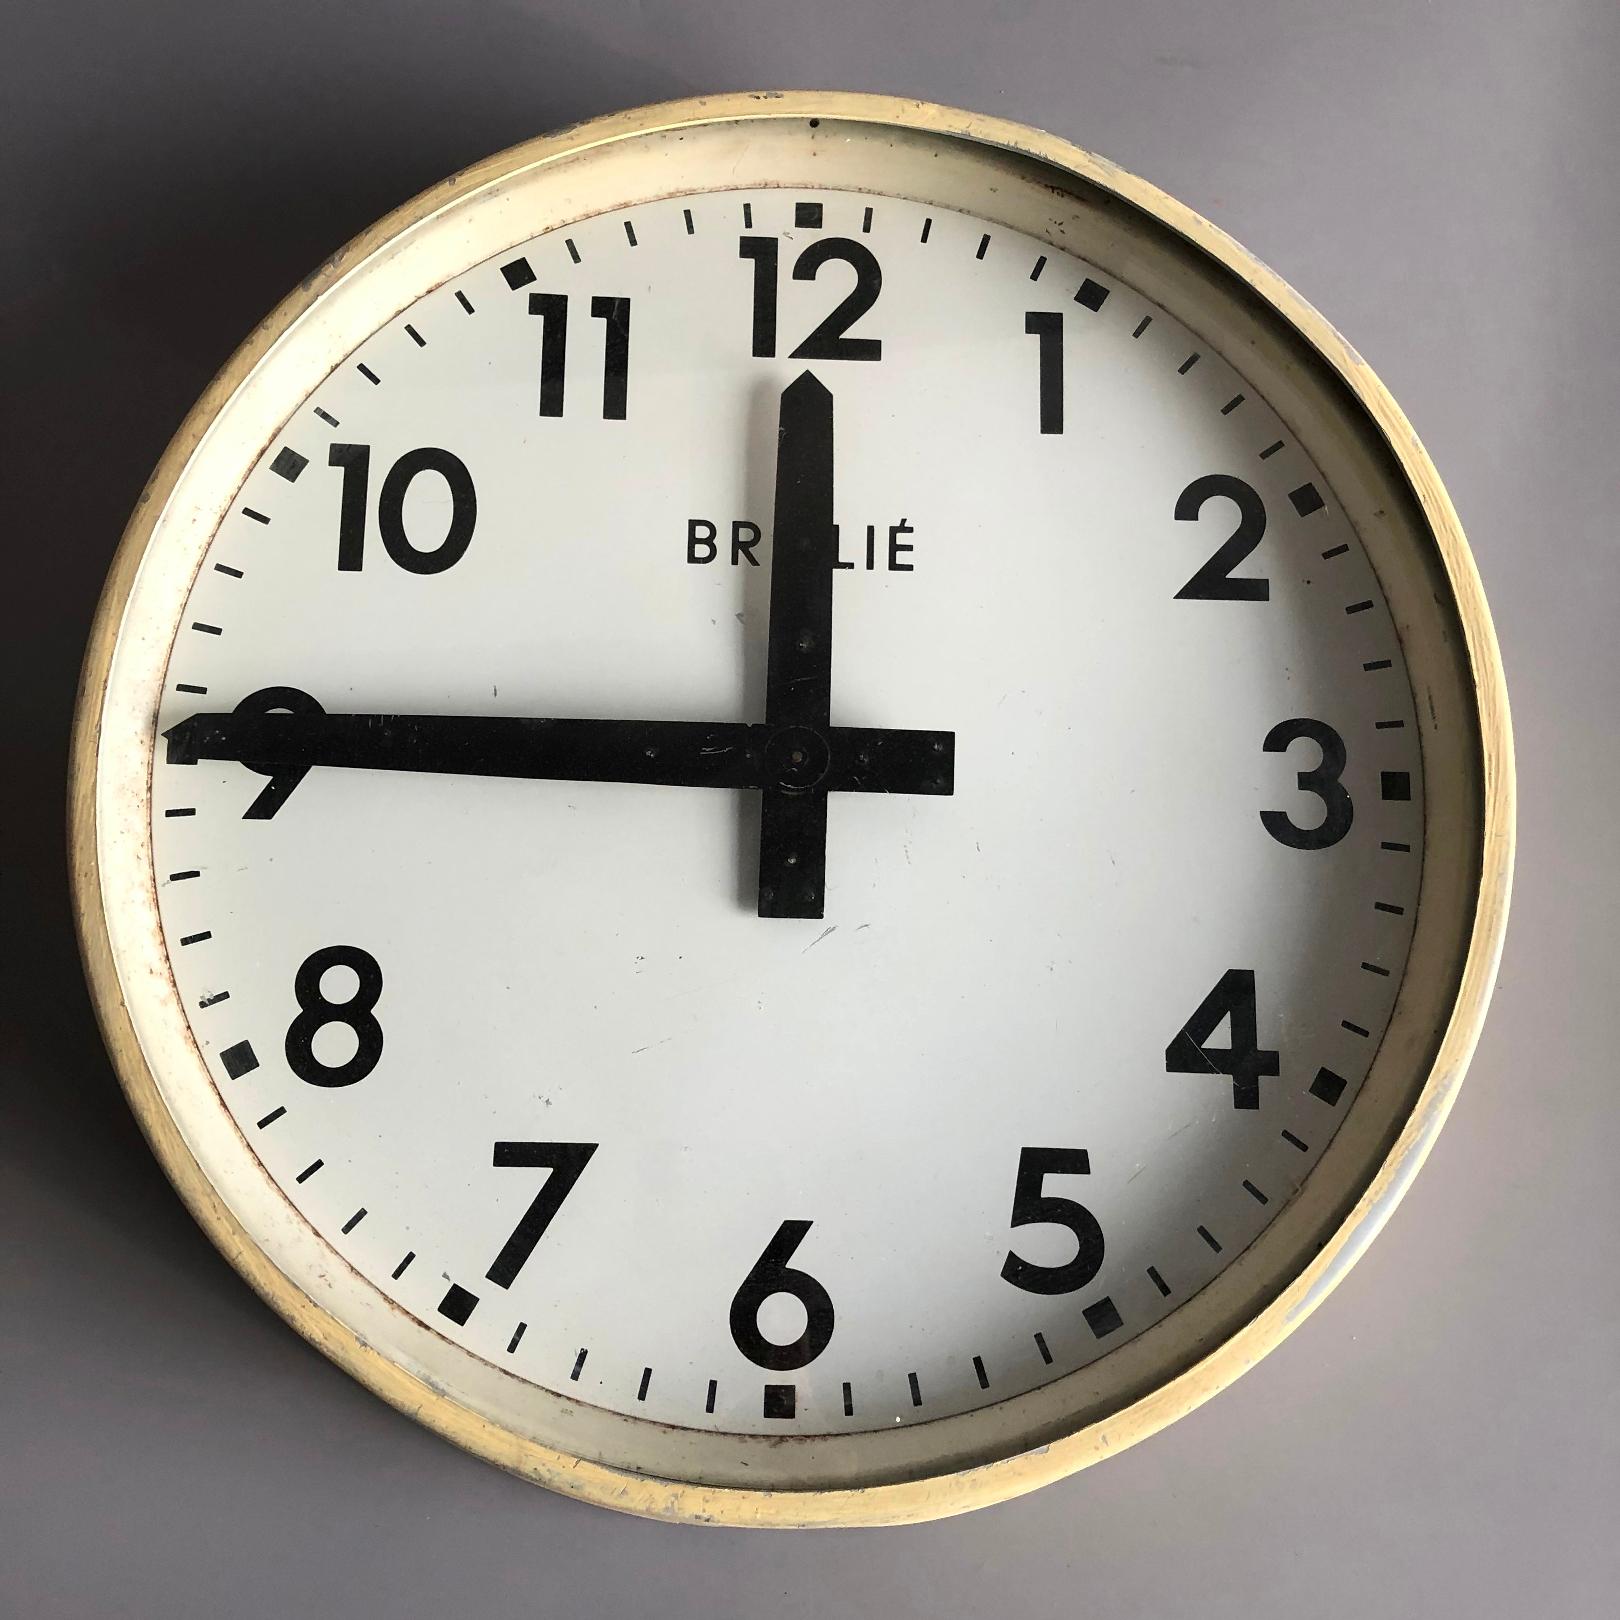 Wall clock by Brillié wqs used in a factory. Clock has a brass mechanical movement. The electric mechanism on the back seems to be in tact but working ability has to be checked.